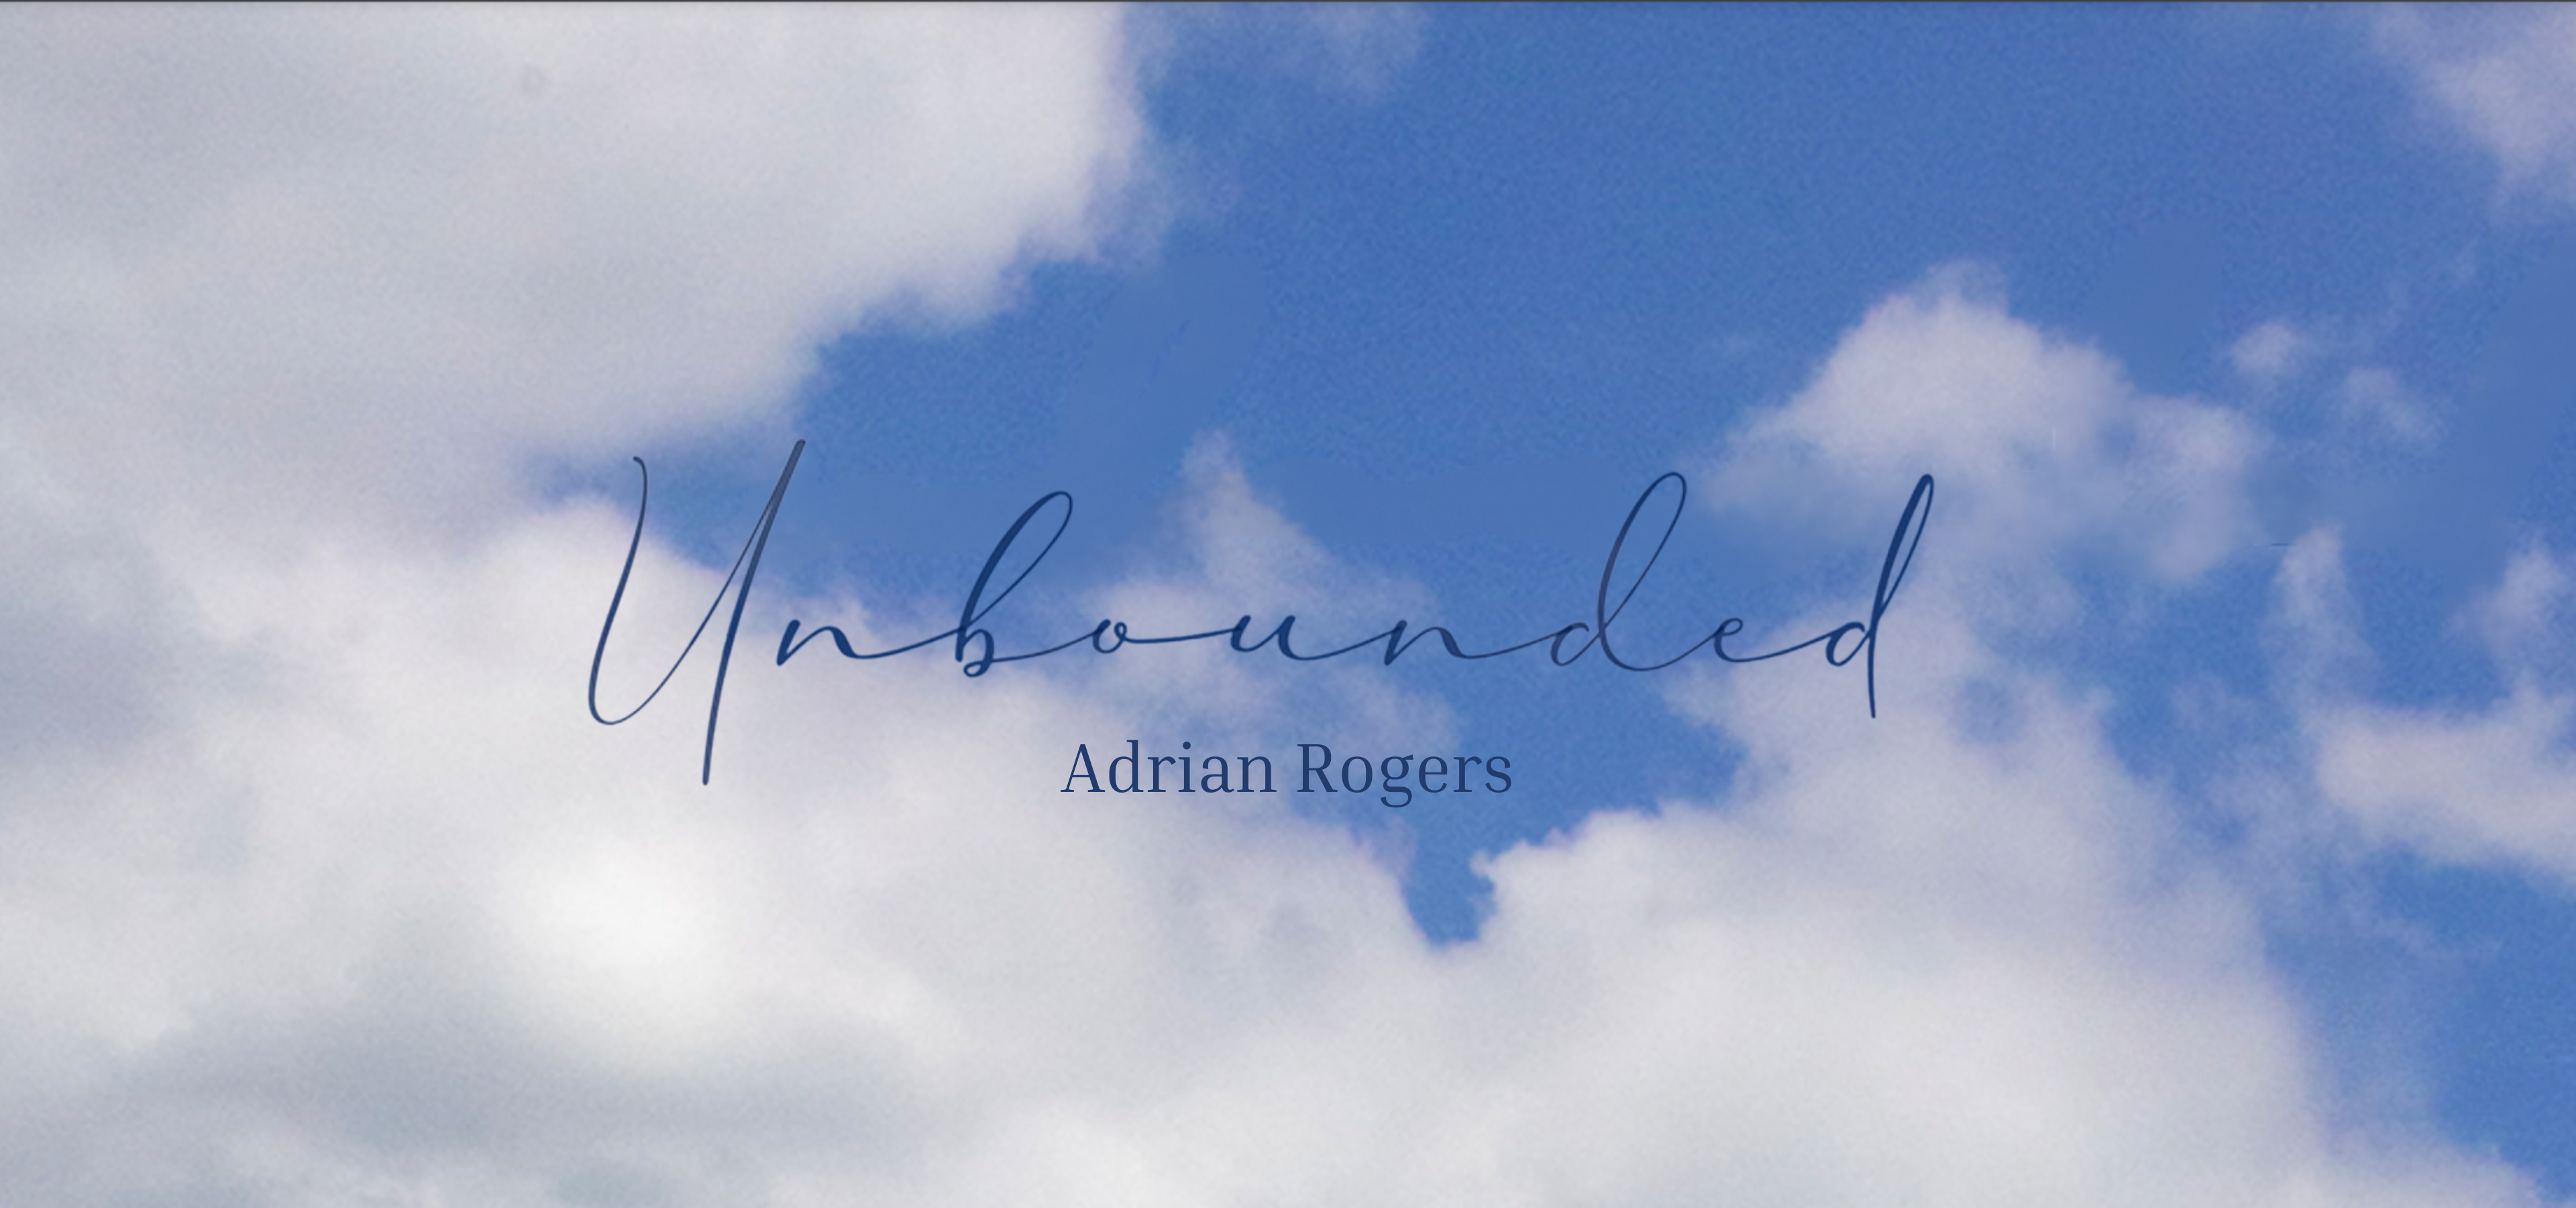 Blue sky with white puffy clouds with text that reads Unbounded, Adrian Rogers